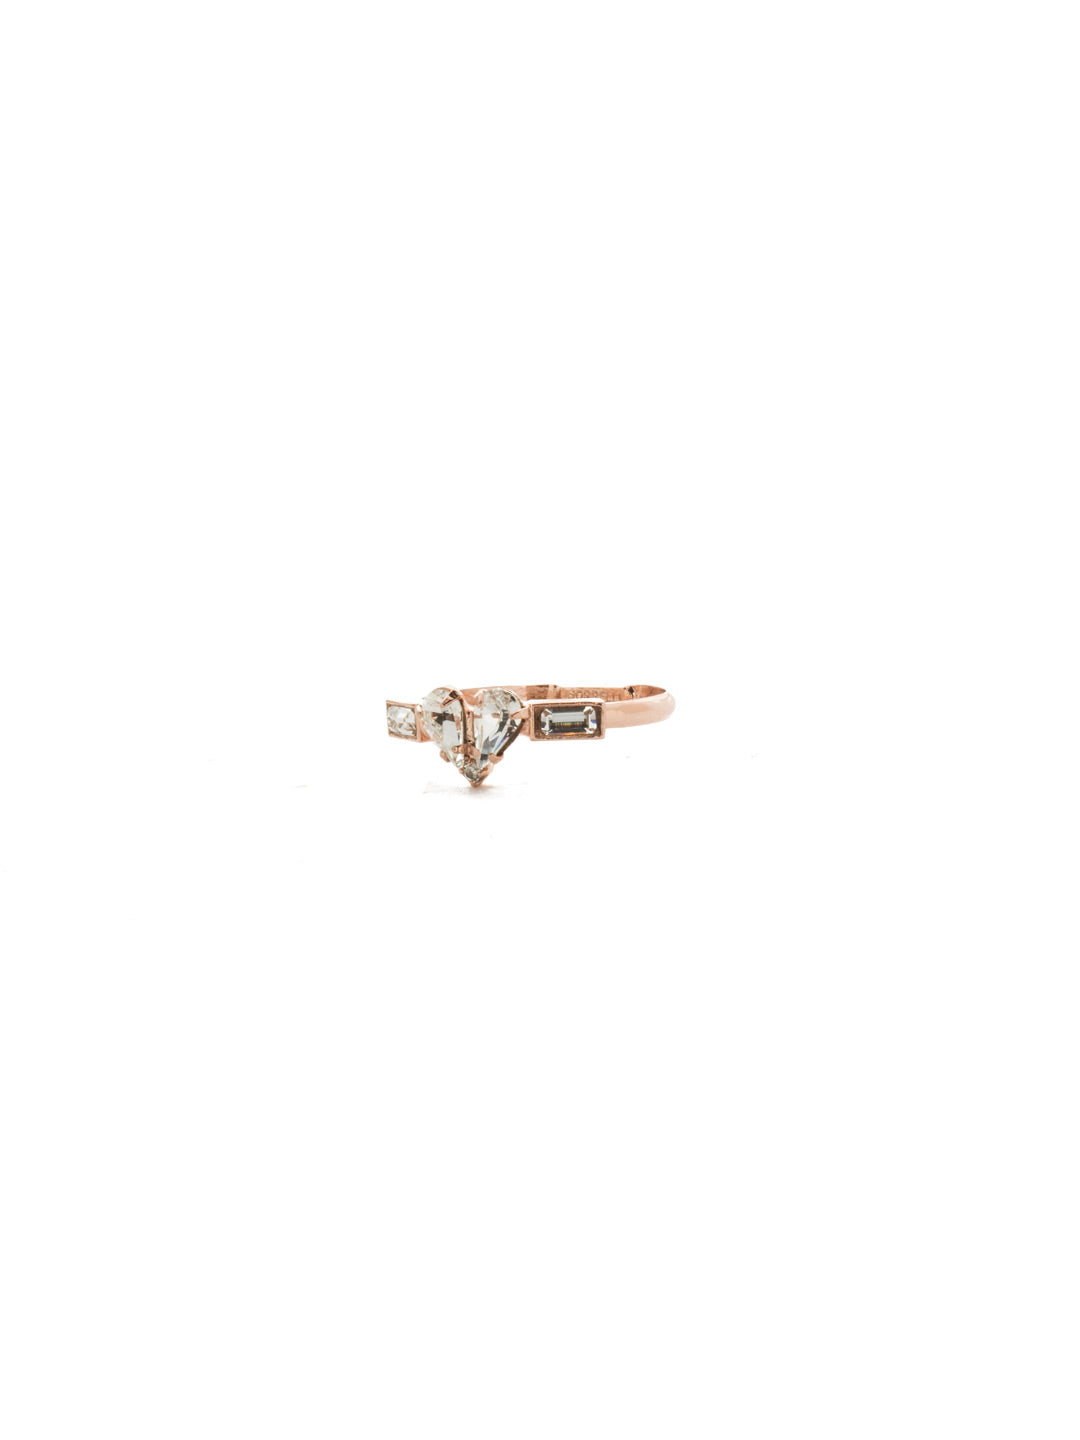 Desire Band Ring - REM5RGCRY - <p>Slip this on for a simple assertion that you love love. The pear crystals showcase a center heart offset by a pair of baguette gems in this gorgeous ring. From Sorrelli's Crystal collection in our Rose Gold-tone finish.</p>